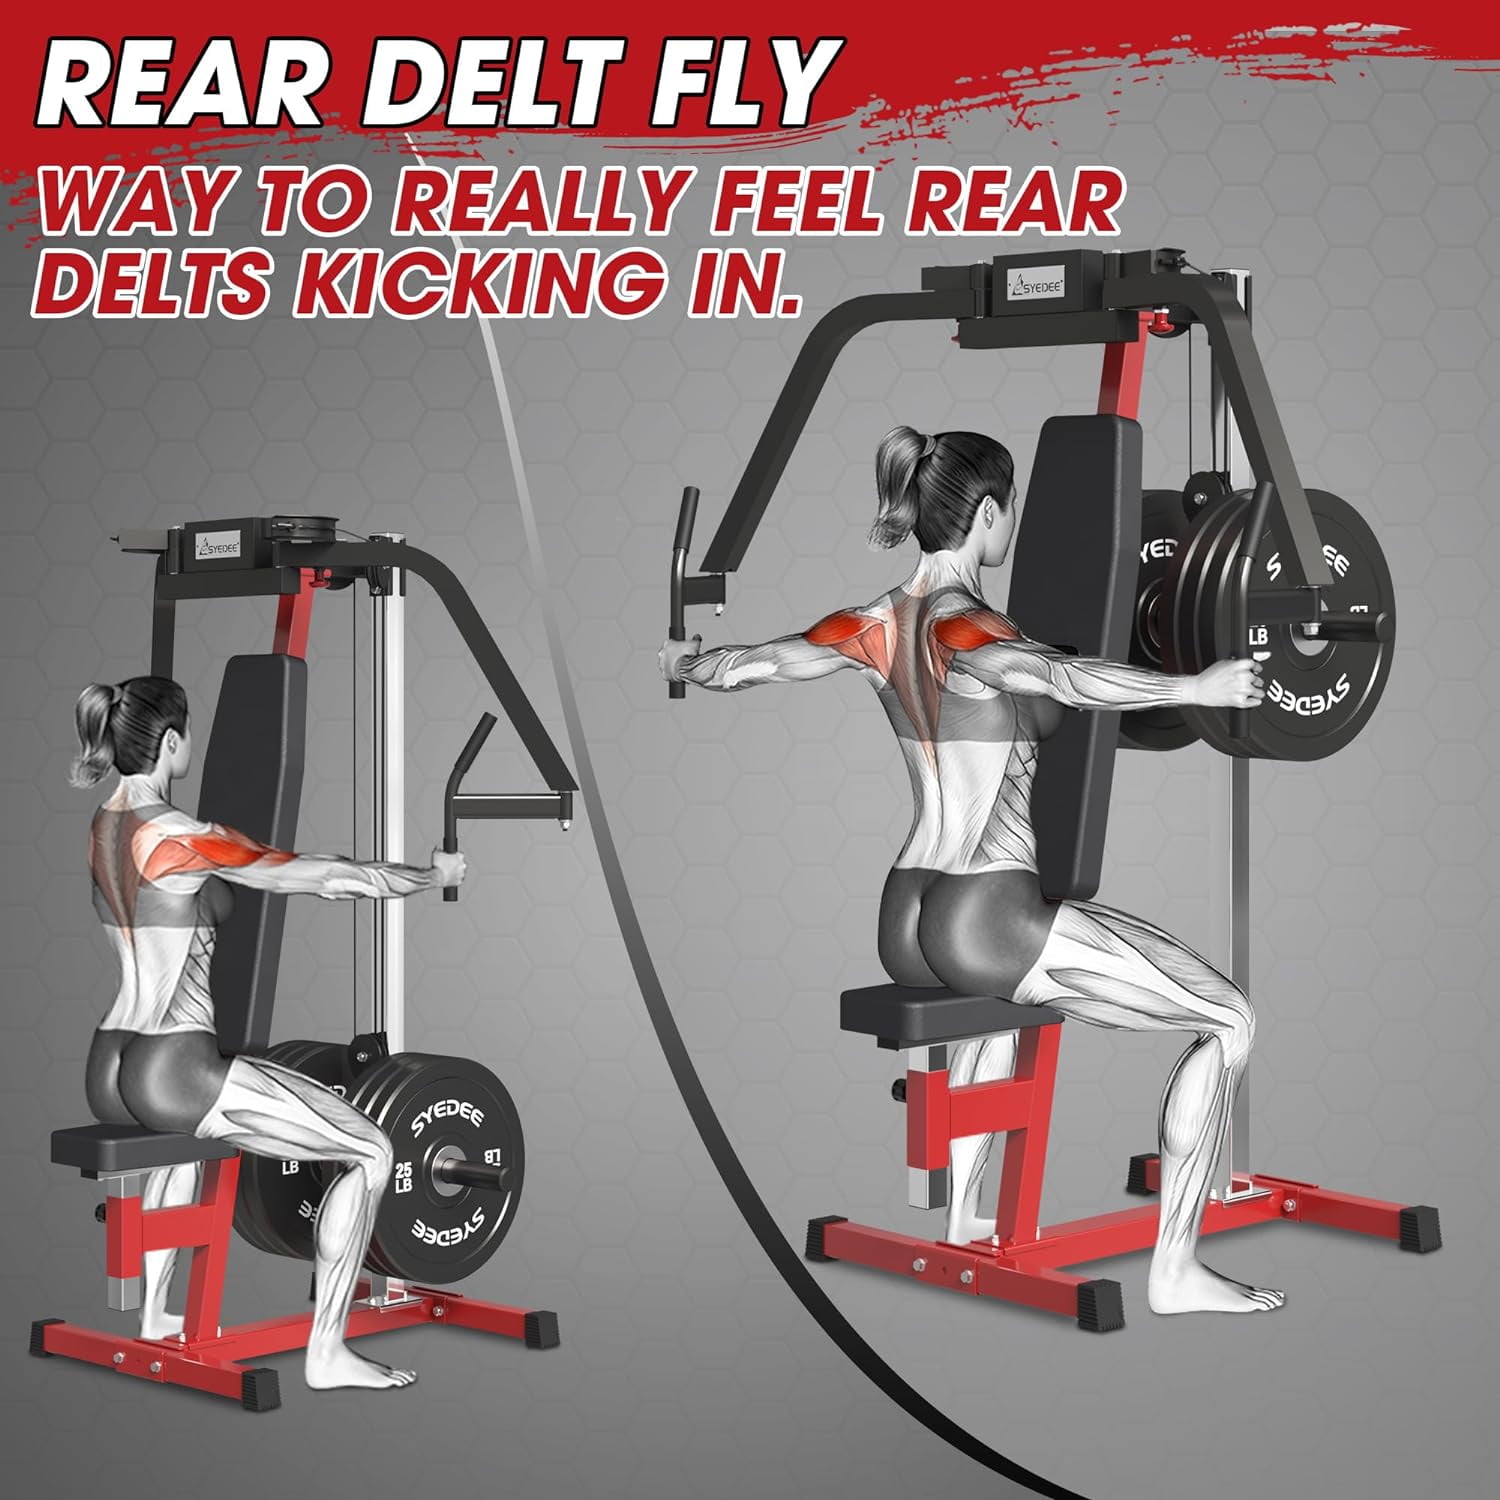 syedee Chest Fly and Reverse Delt Machine, 400 lbs Upper Body Specialty Machine for Pectoral and Rear Deltoid for Home Gym